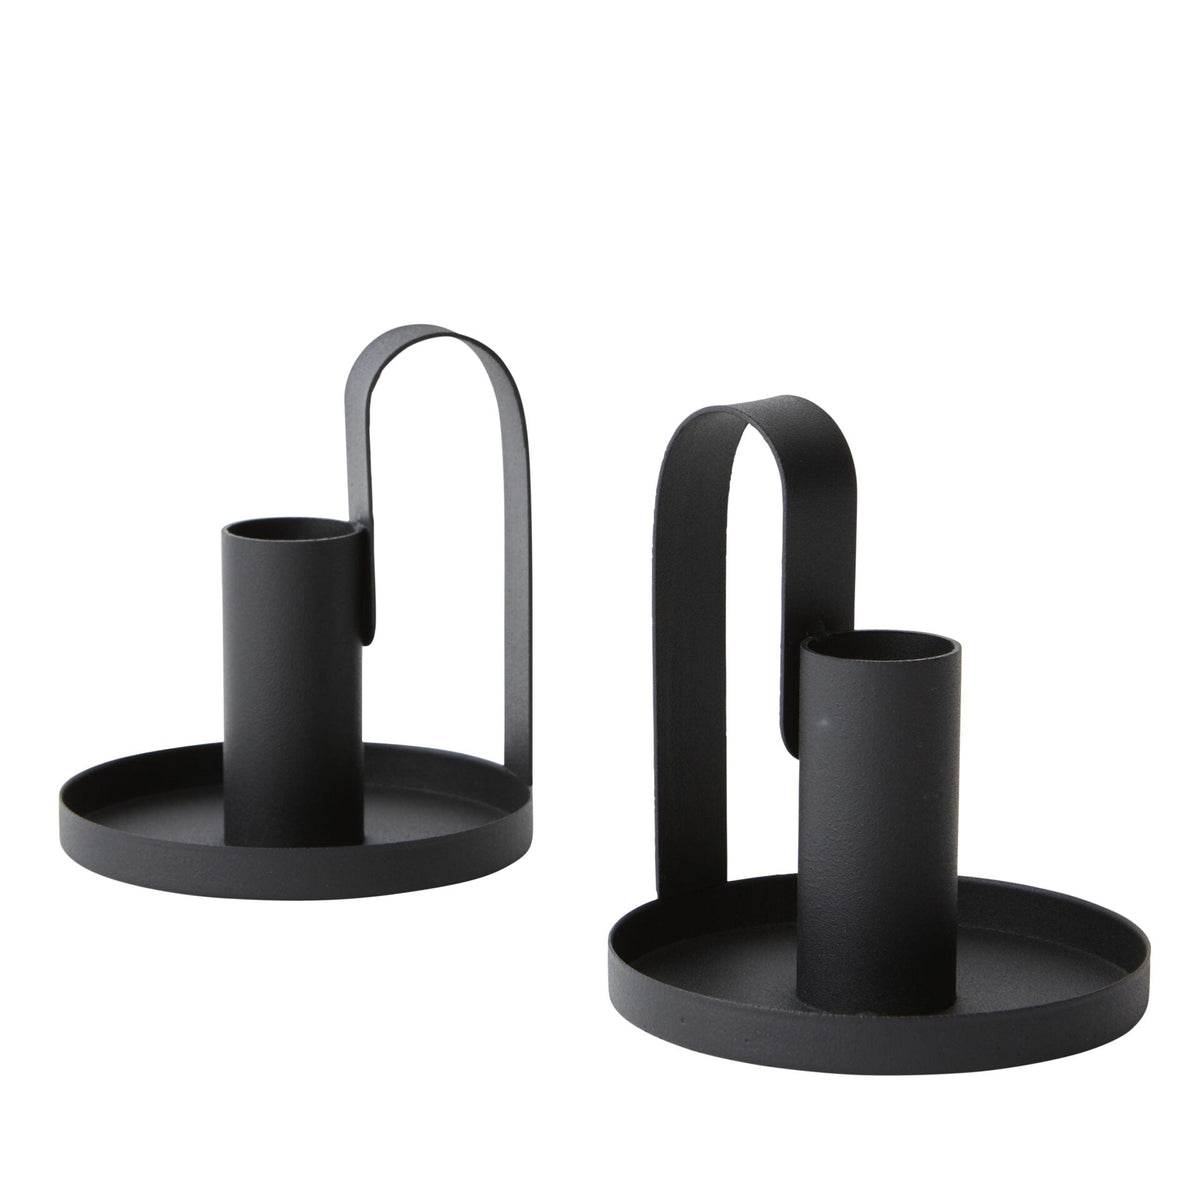 Portable Iron Candle Holder in Black - Set of 2 - Notbrand